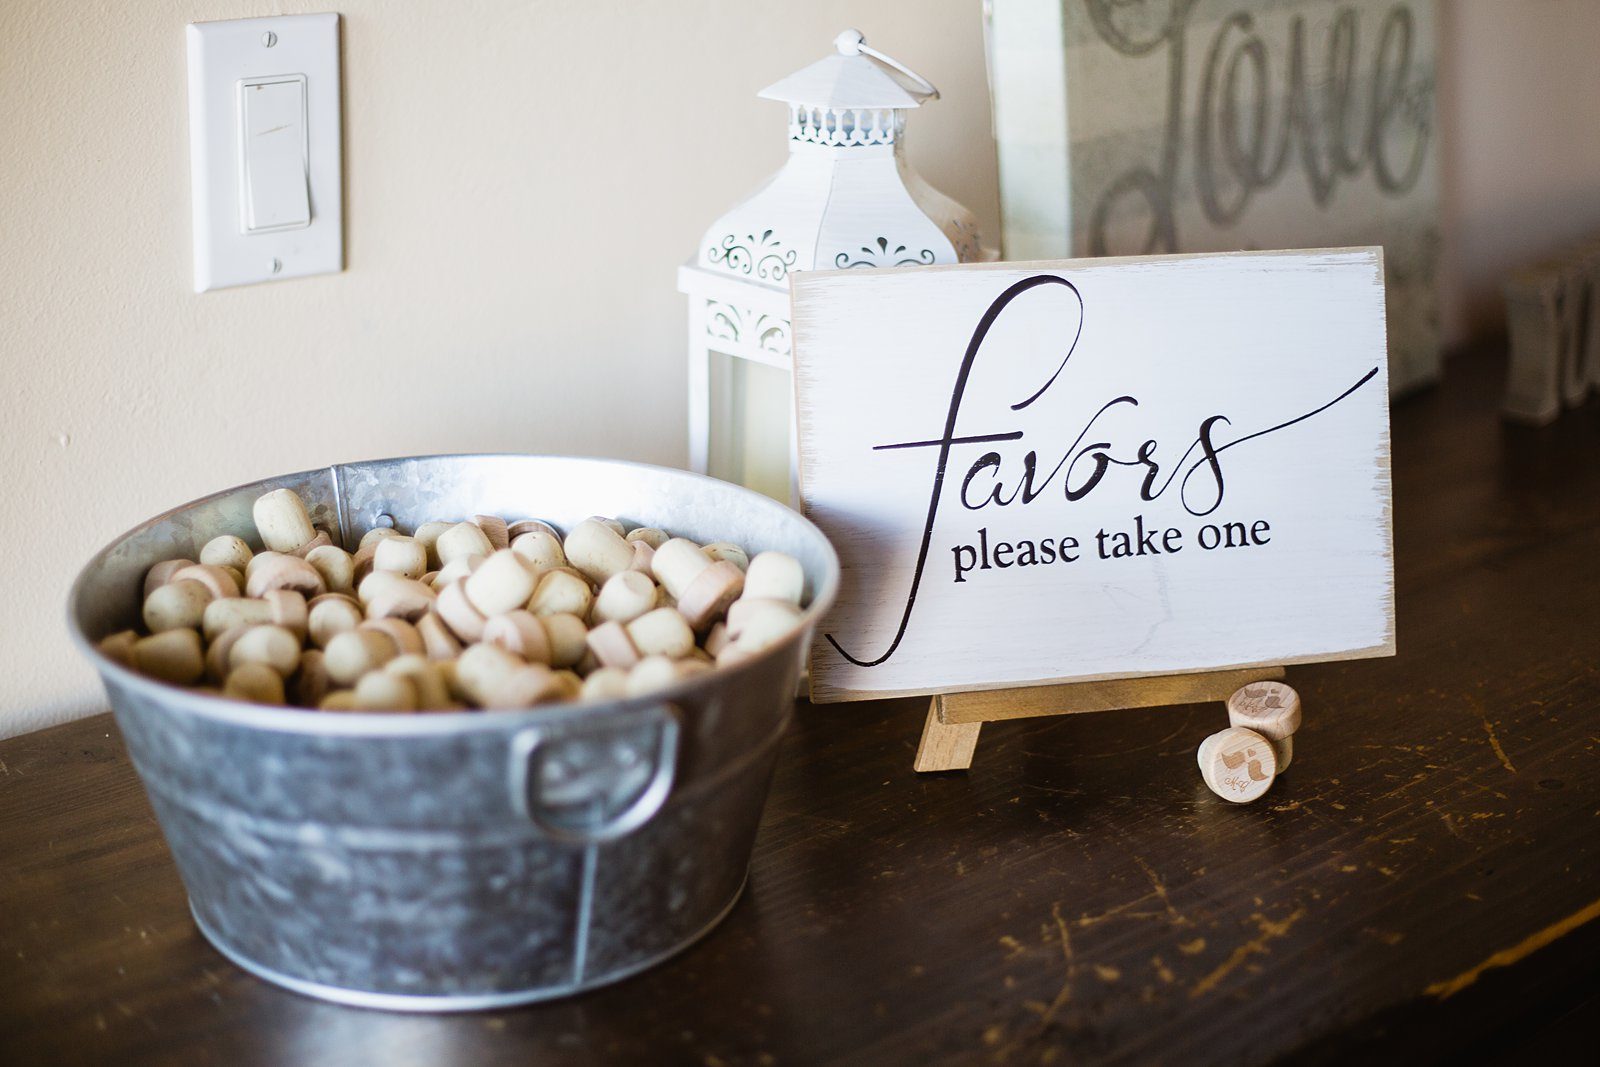 Wine cork favors personalized with the couple's names and wedding date by PMA Photography.